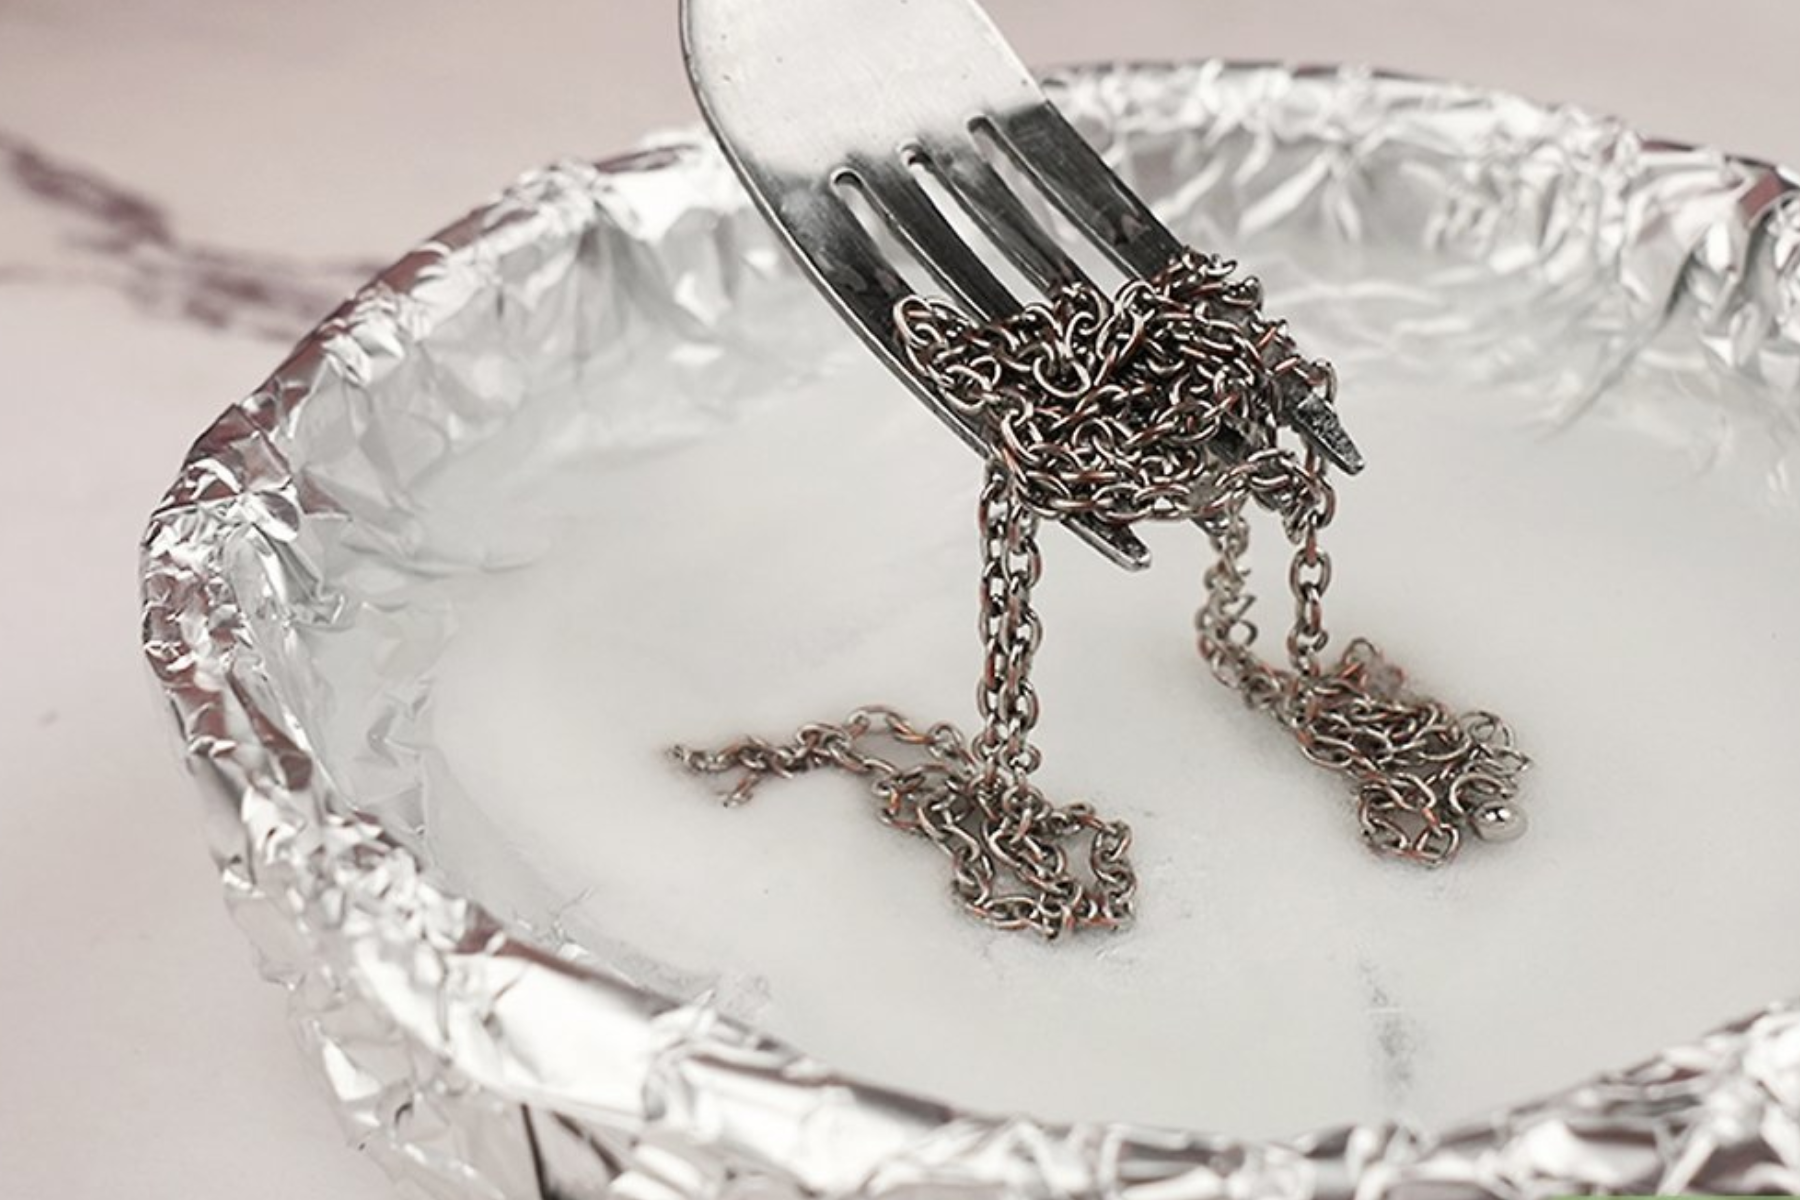 A fork places a silver necklace on a foil containing water